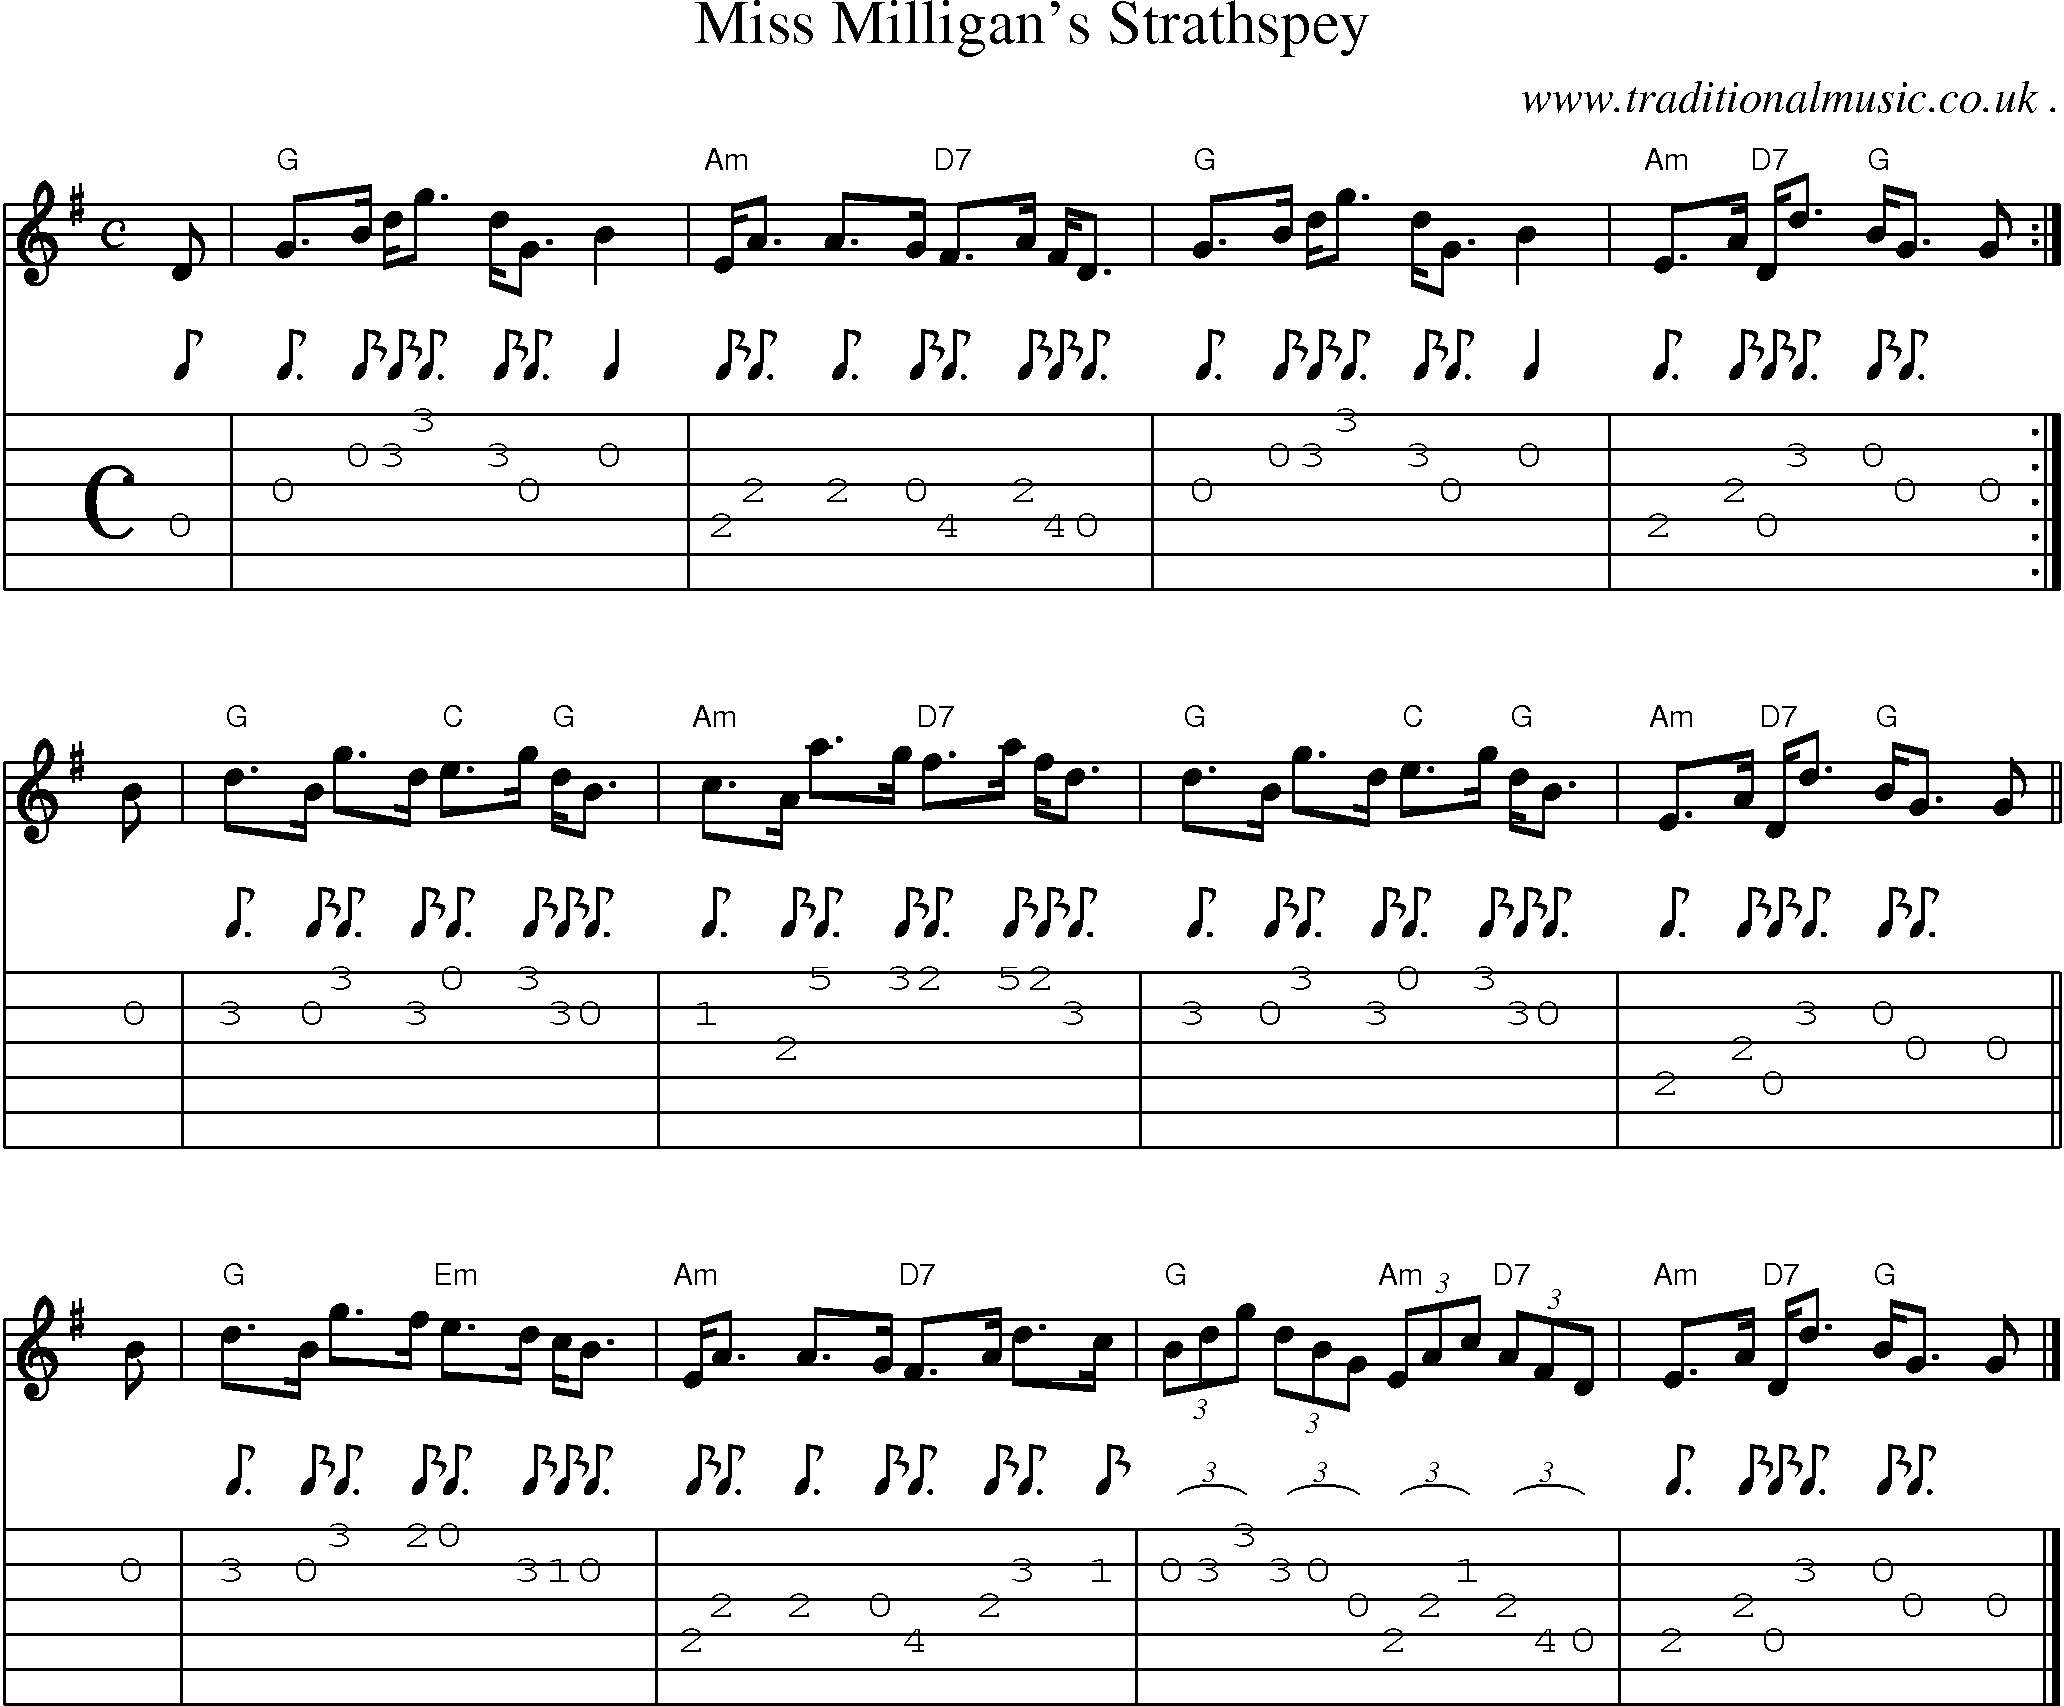 Sheet-music  score, Chords and Guitar Tabs for Miss Milligans Strathspey